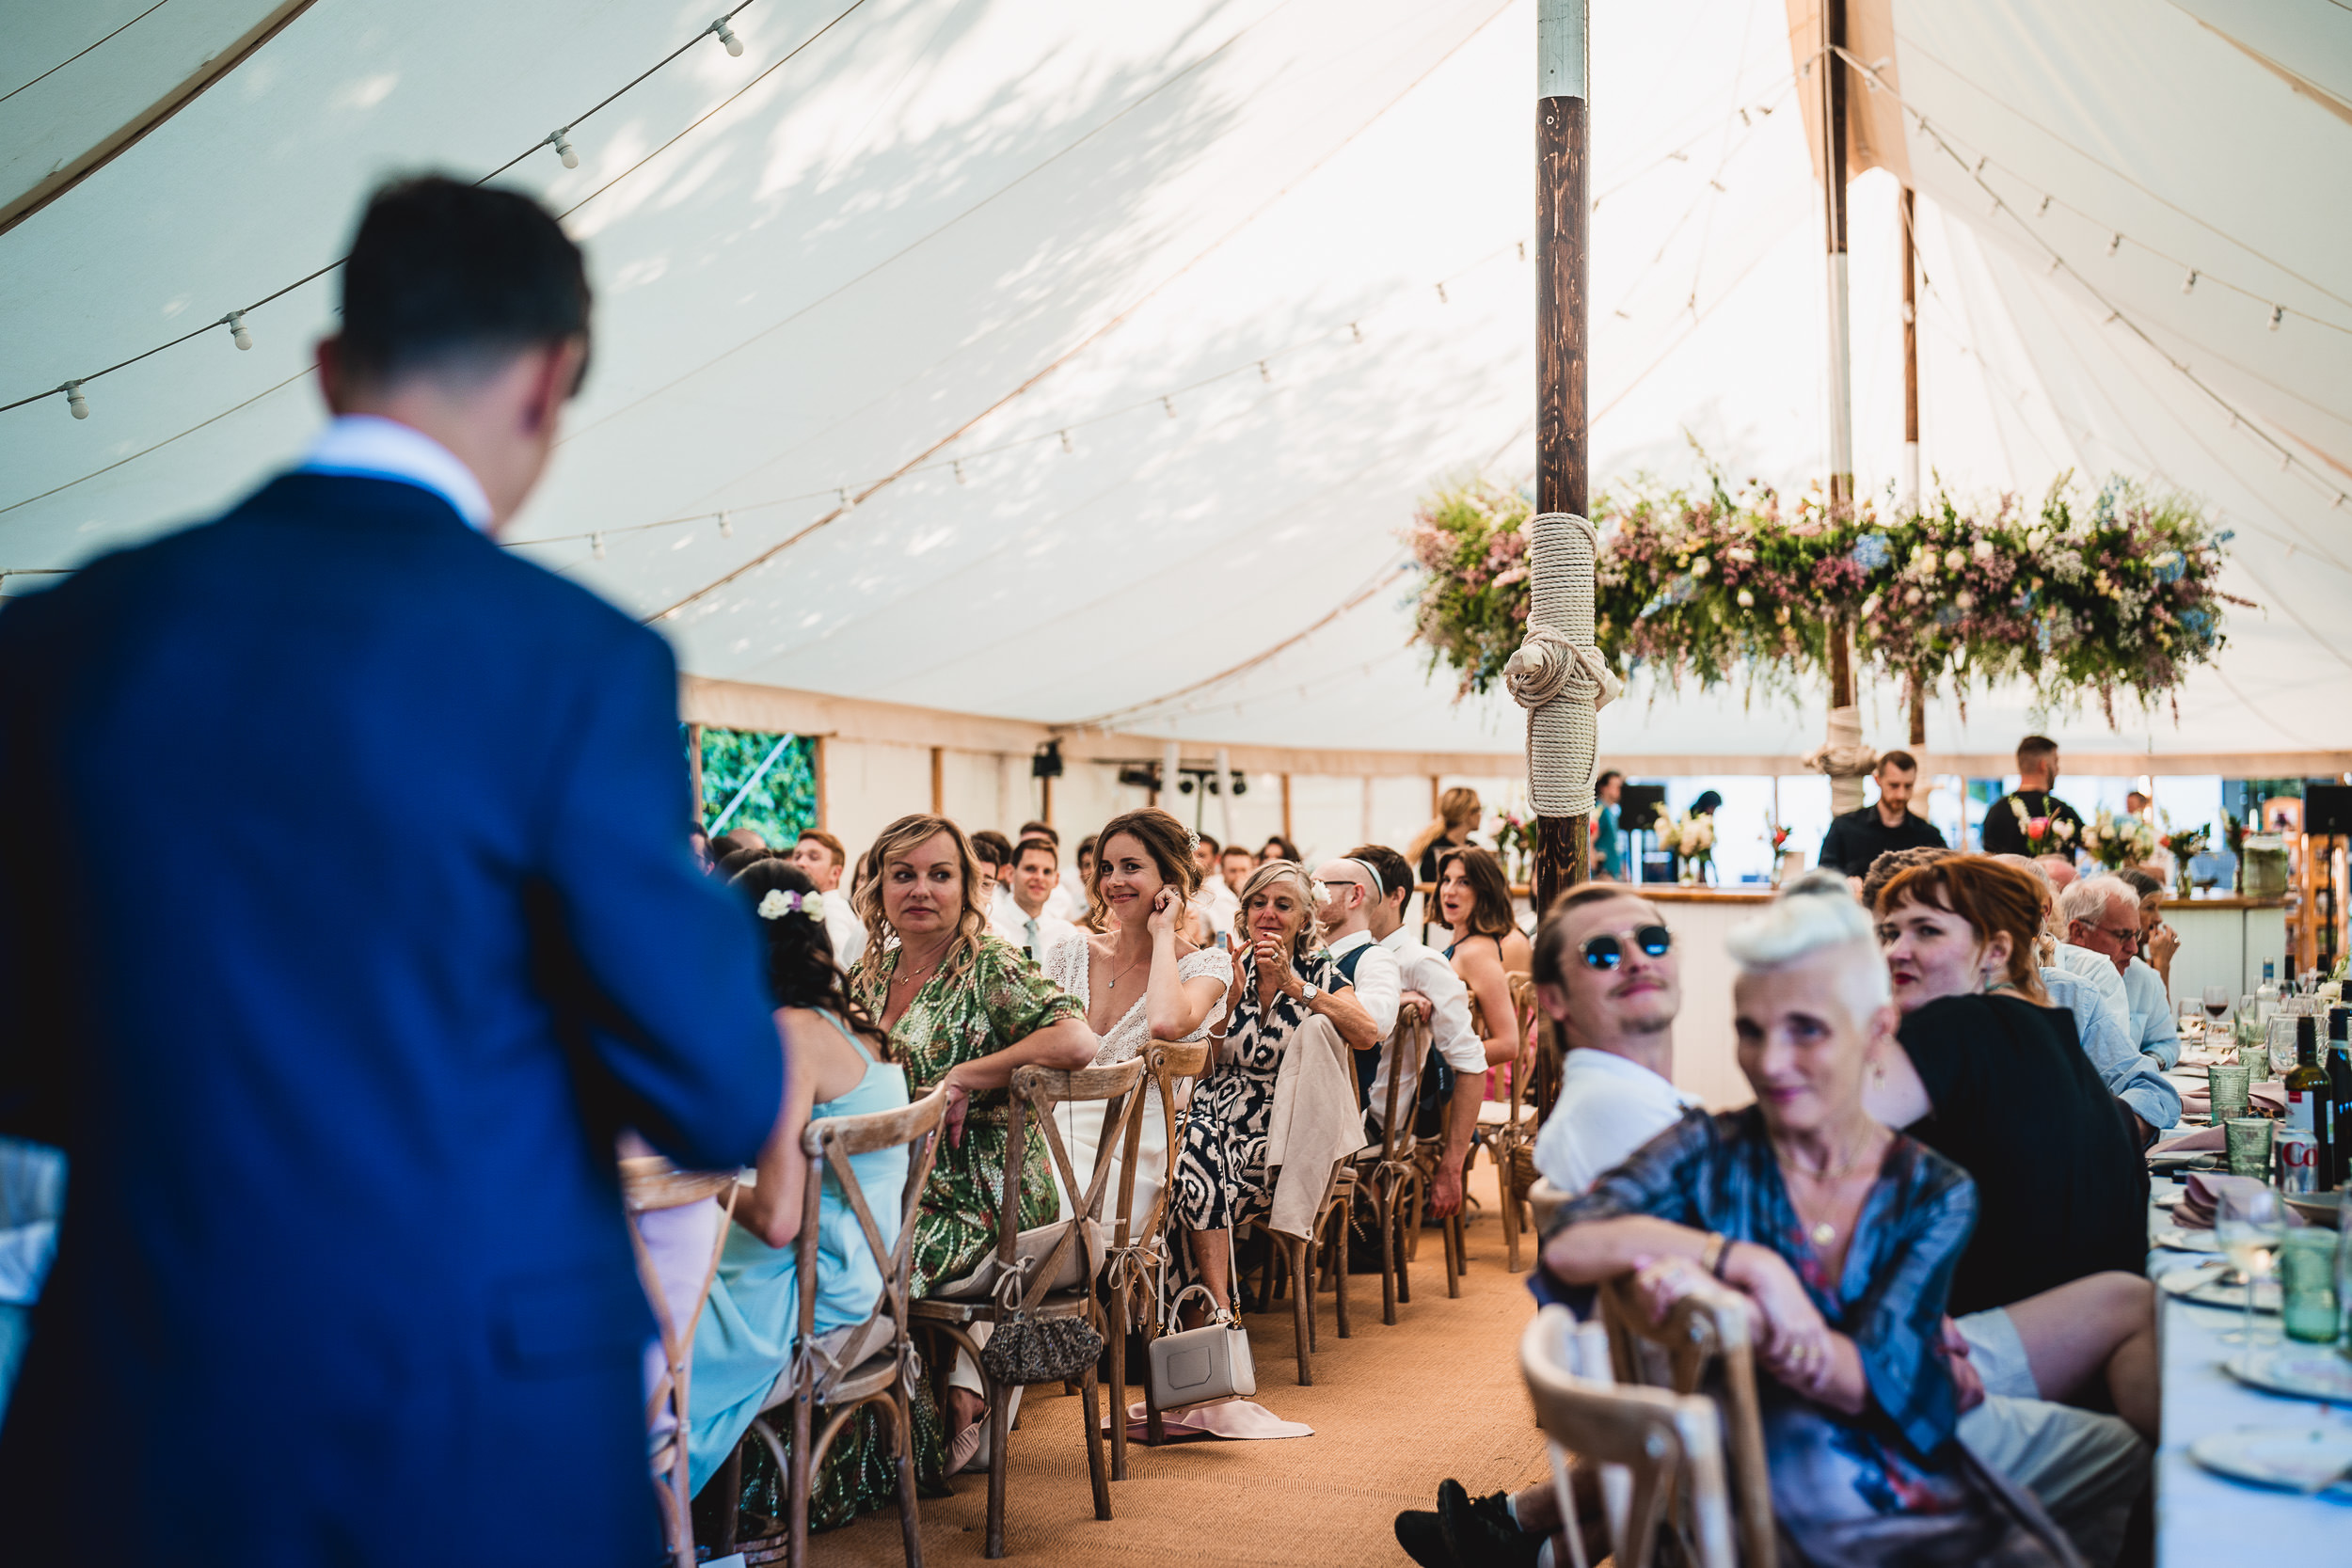 A groom is giving a speech at his wedding in a tent.